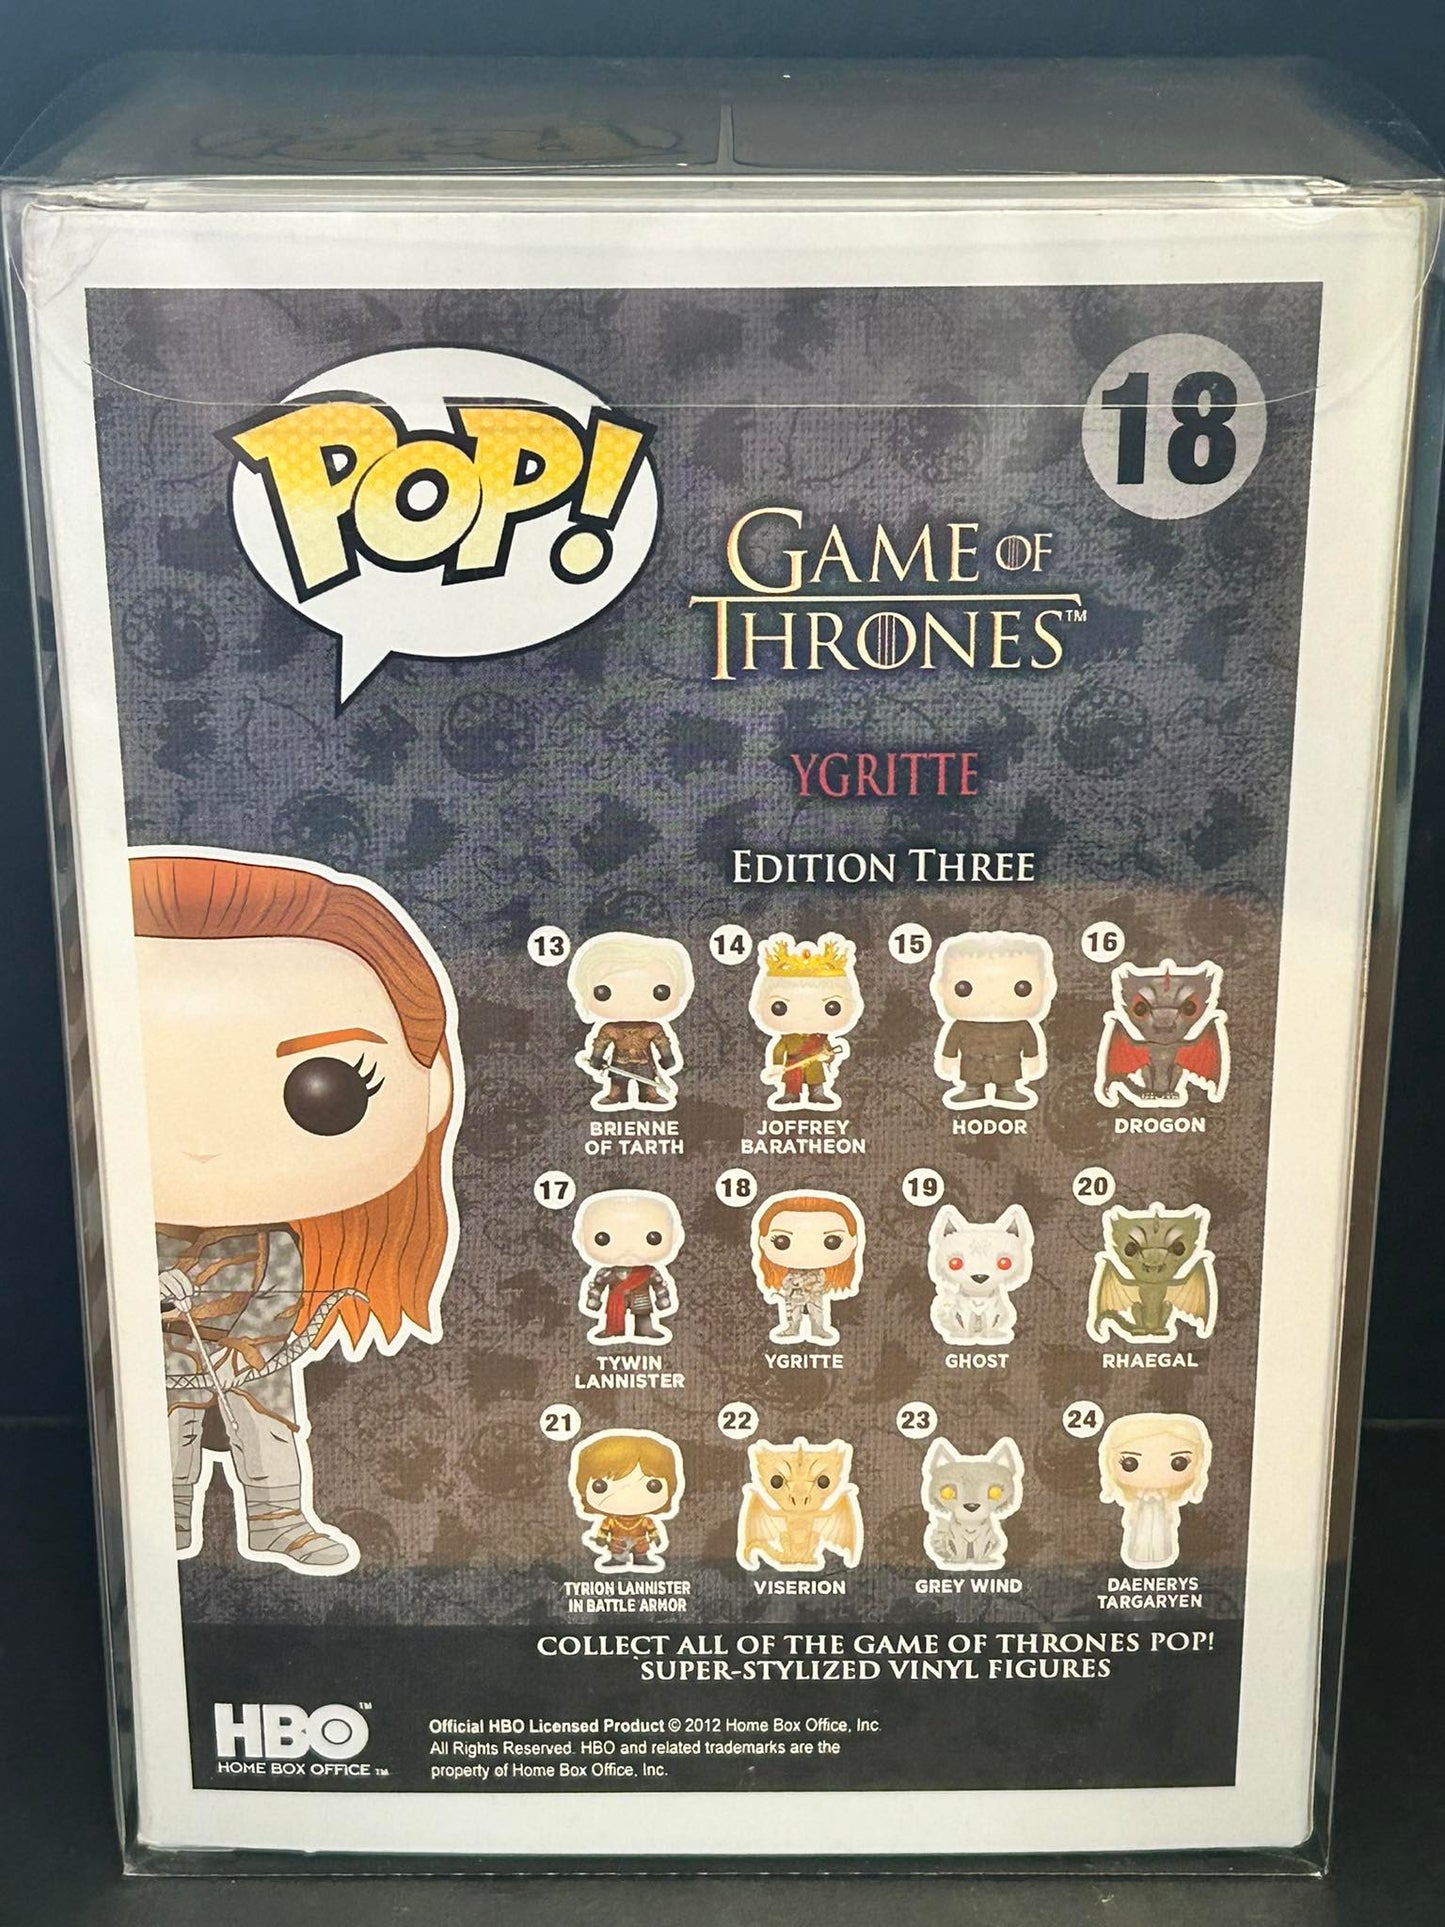 Figurine Pop Game of Thrones #18 Ygritte